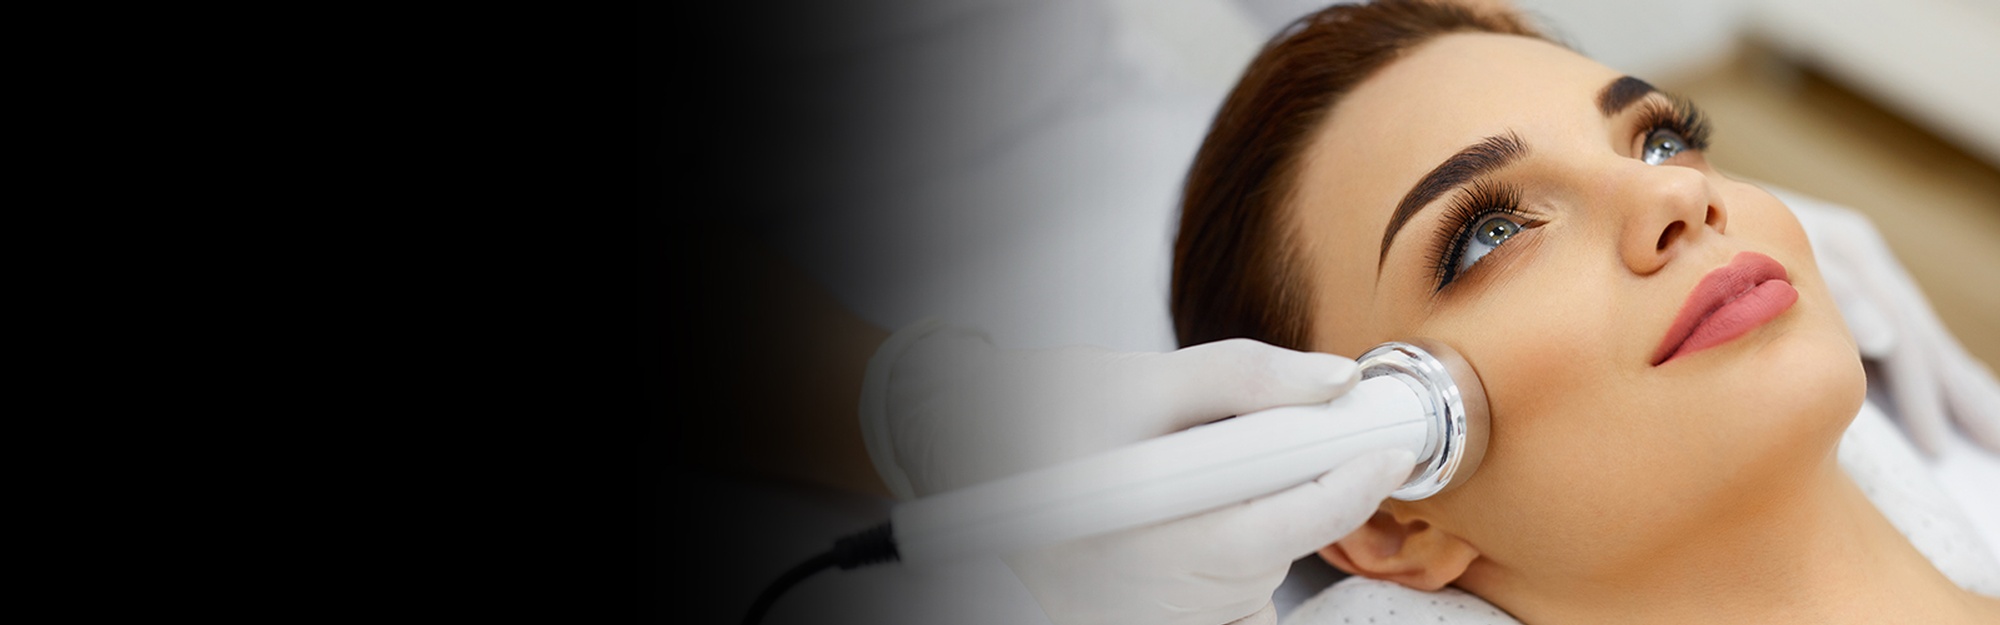 Get Hands-On Experience in Medical Aesthetics + Beauty Injectables